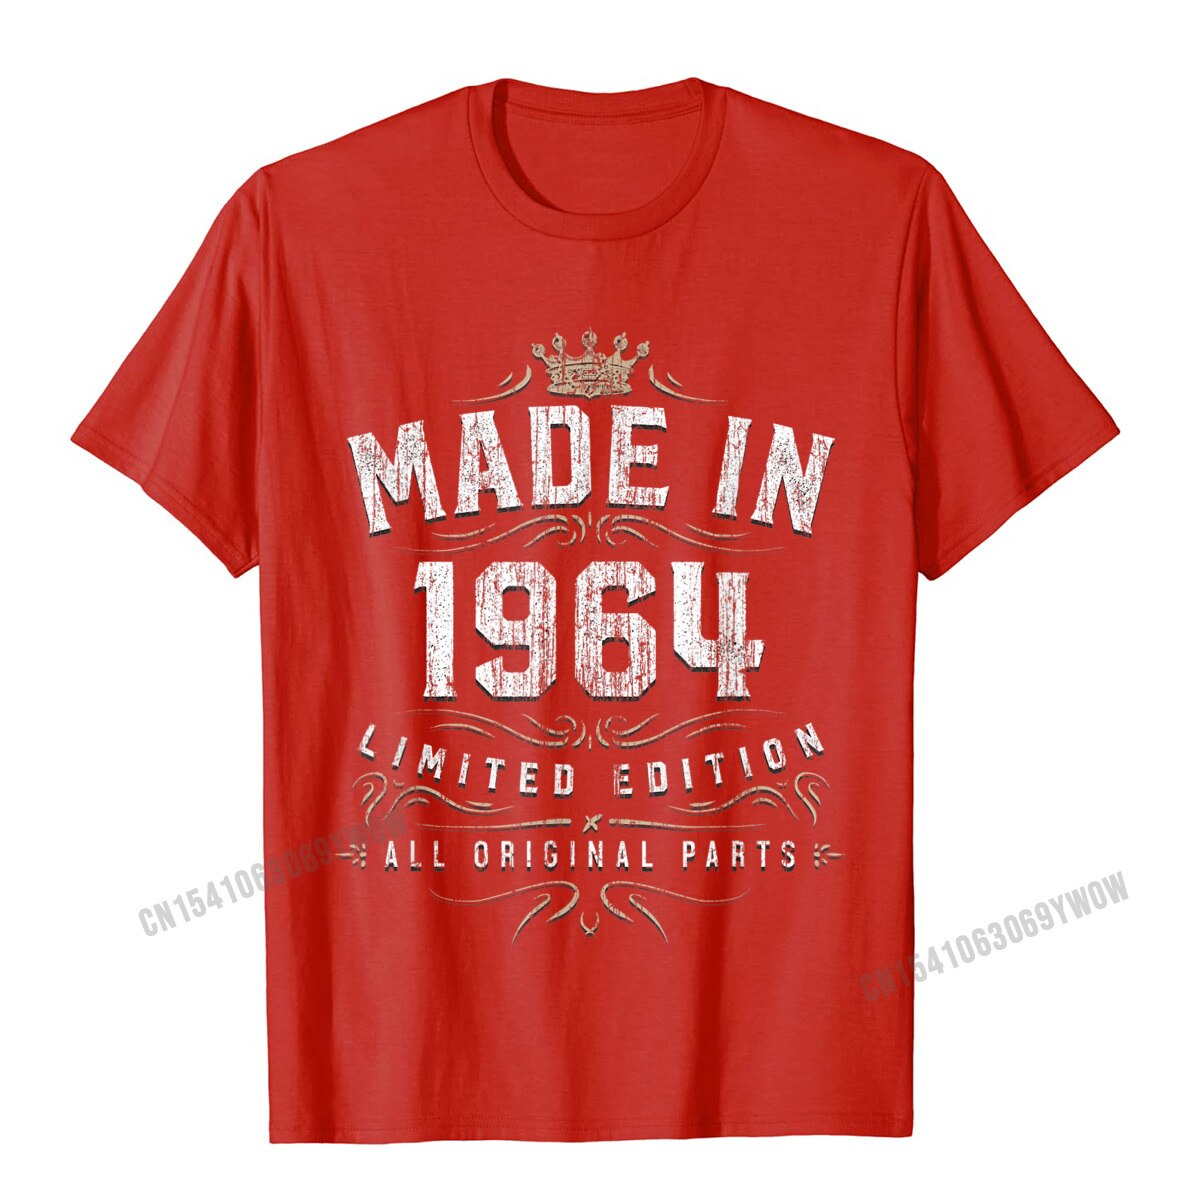 Camisa Family T Shirt for Men Cotton Fabric Father Day Tops Shirt Simple Style Tops & Tees Short Sleeve Prevalent Round Collar Made In 1964 Shirt Birthday 55 Limited Edition Image Gifts__994 red